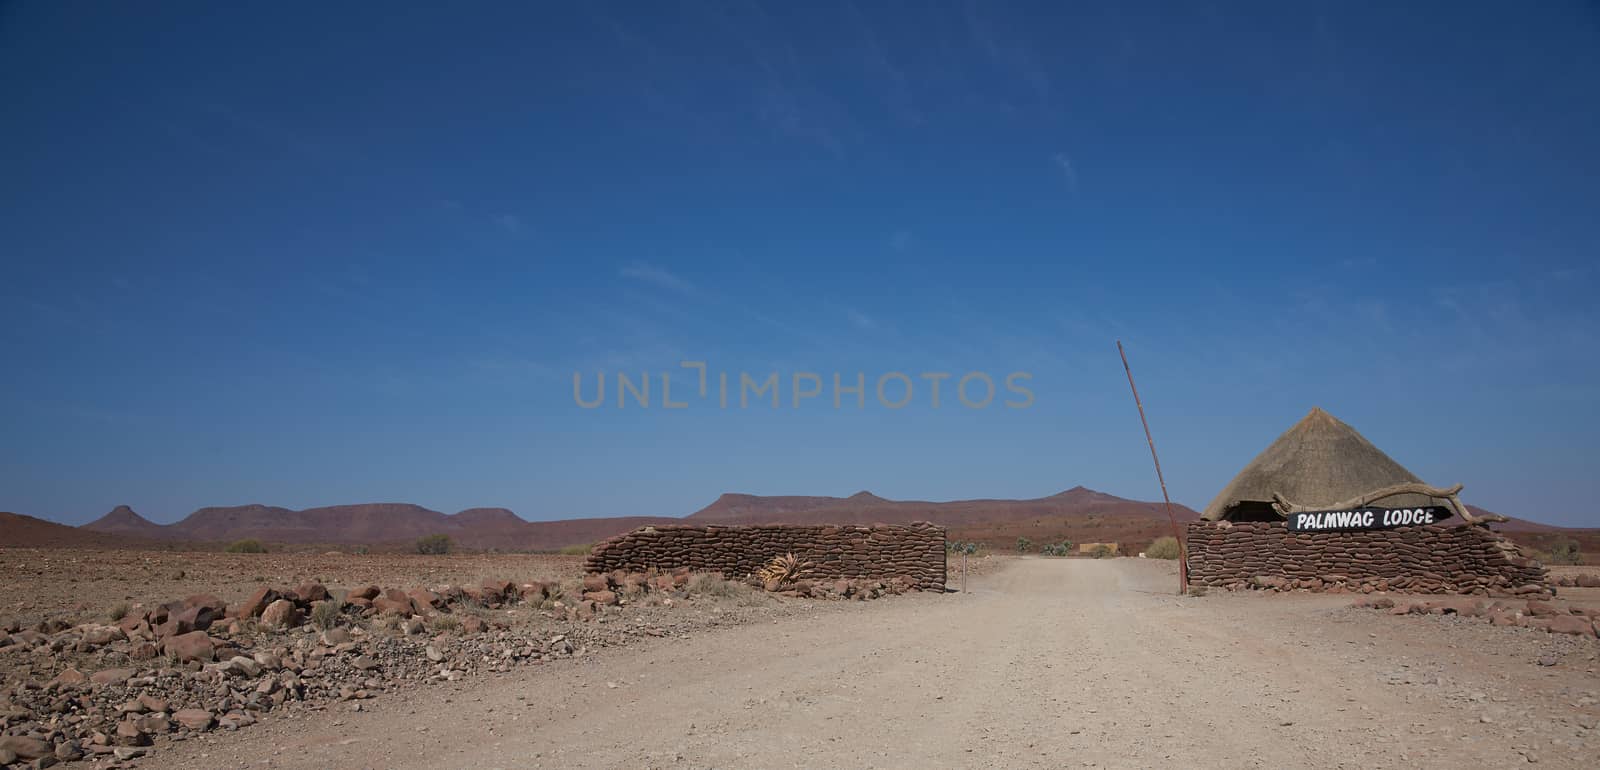 Entrance to the Palmwag Lodge in the wilderness of Damaraland in Namibia